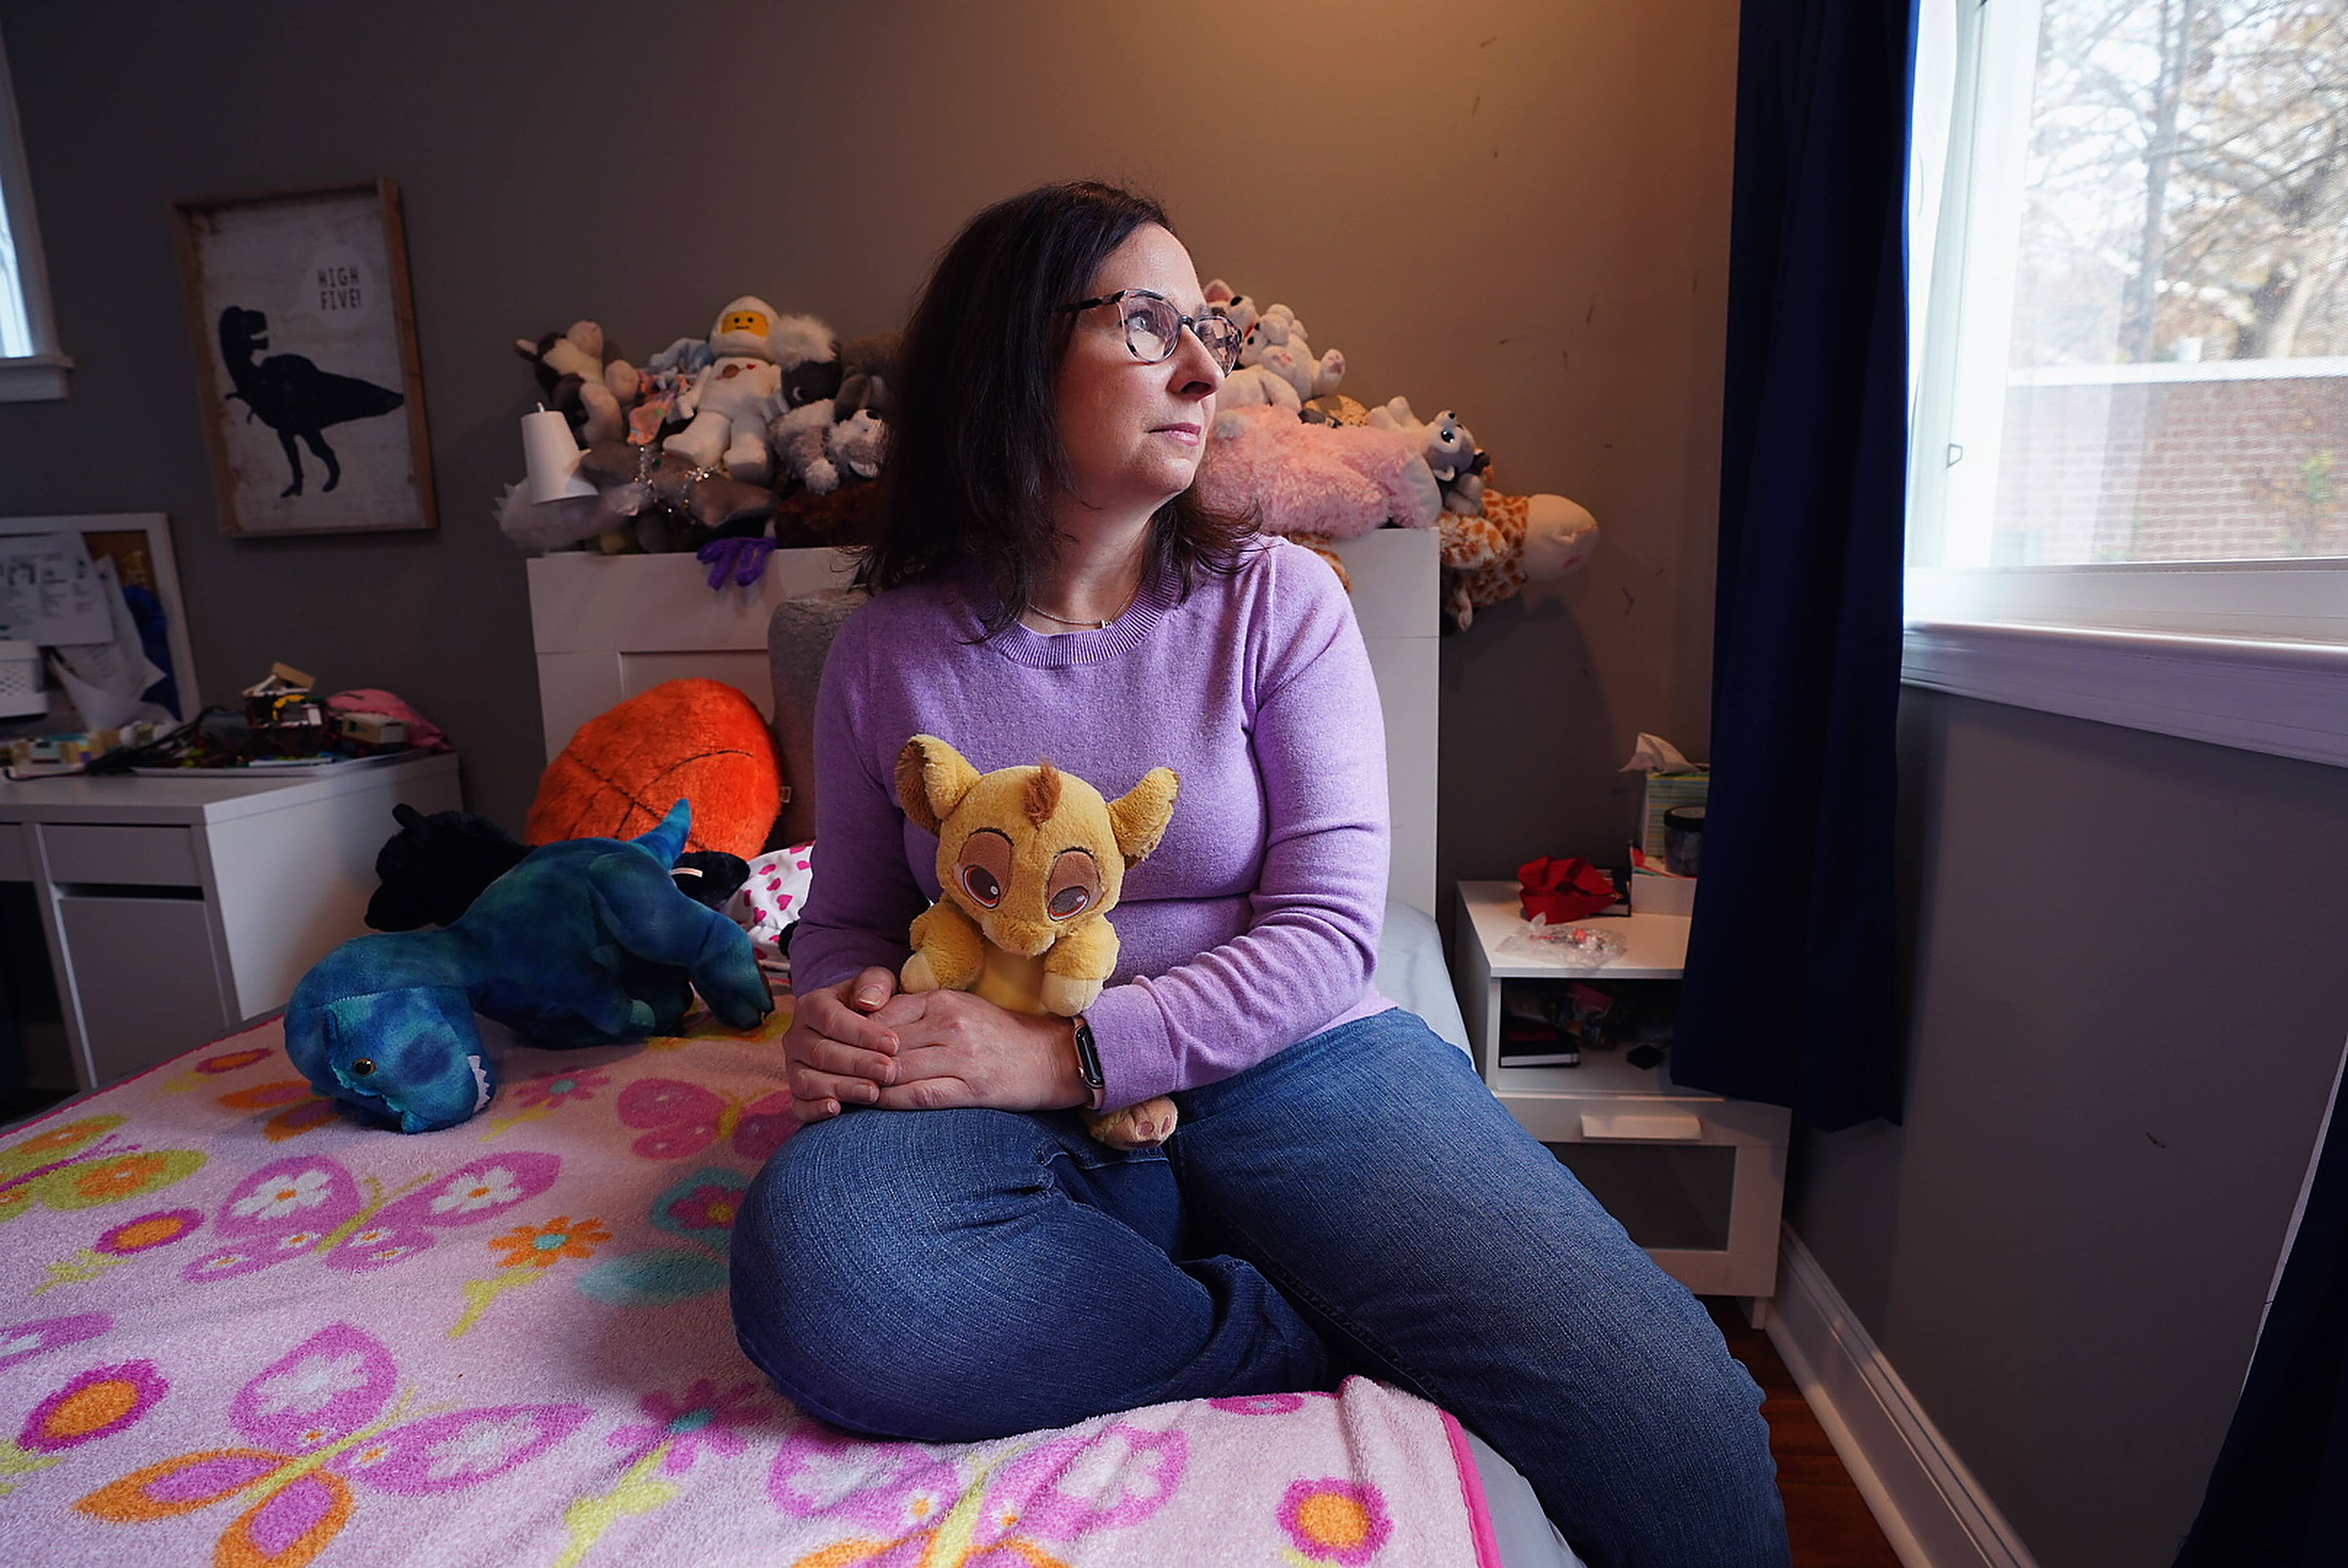 Danielle Leclair is mom to Patience, a 14-year-old girl she adopted from Delaware. Patience has PTSD and other mood disorders likely as a result of fetal alcohol syndrome and childhood abuse and neglect. Leclair has sought help for Patience since adopting her in 2017 but has been failed by the state's child services system.